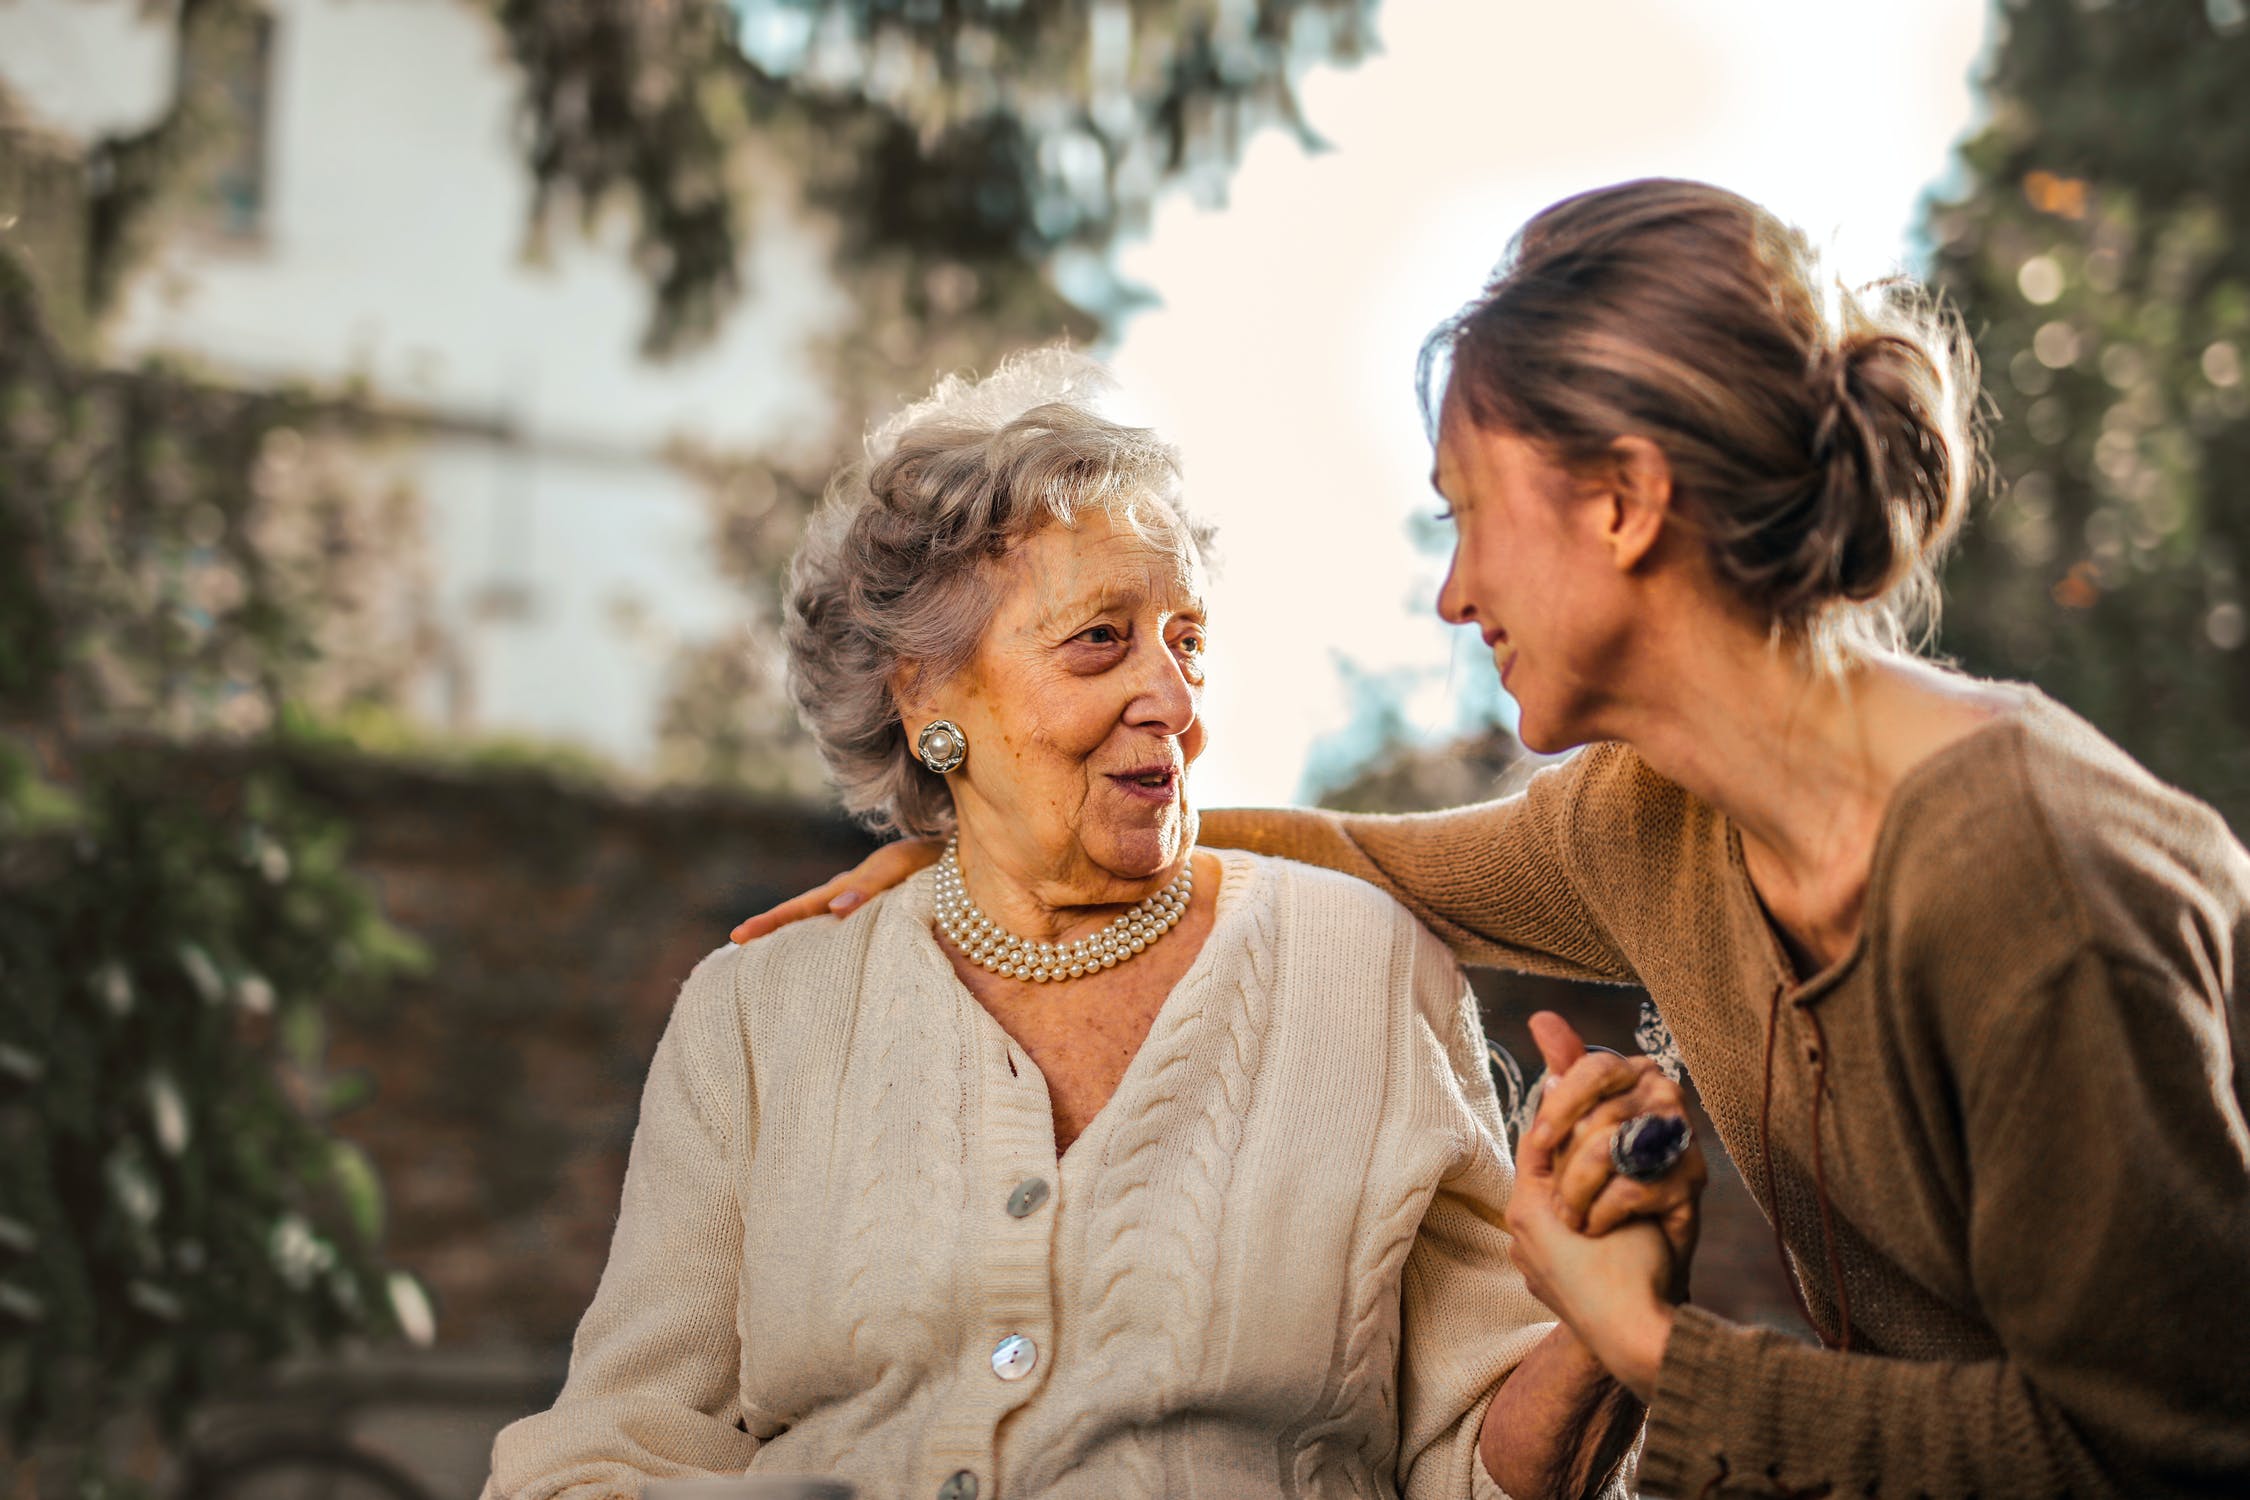 How To Take Care Of Your Aging Parents